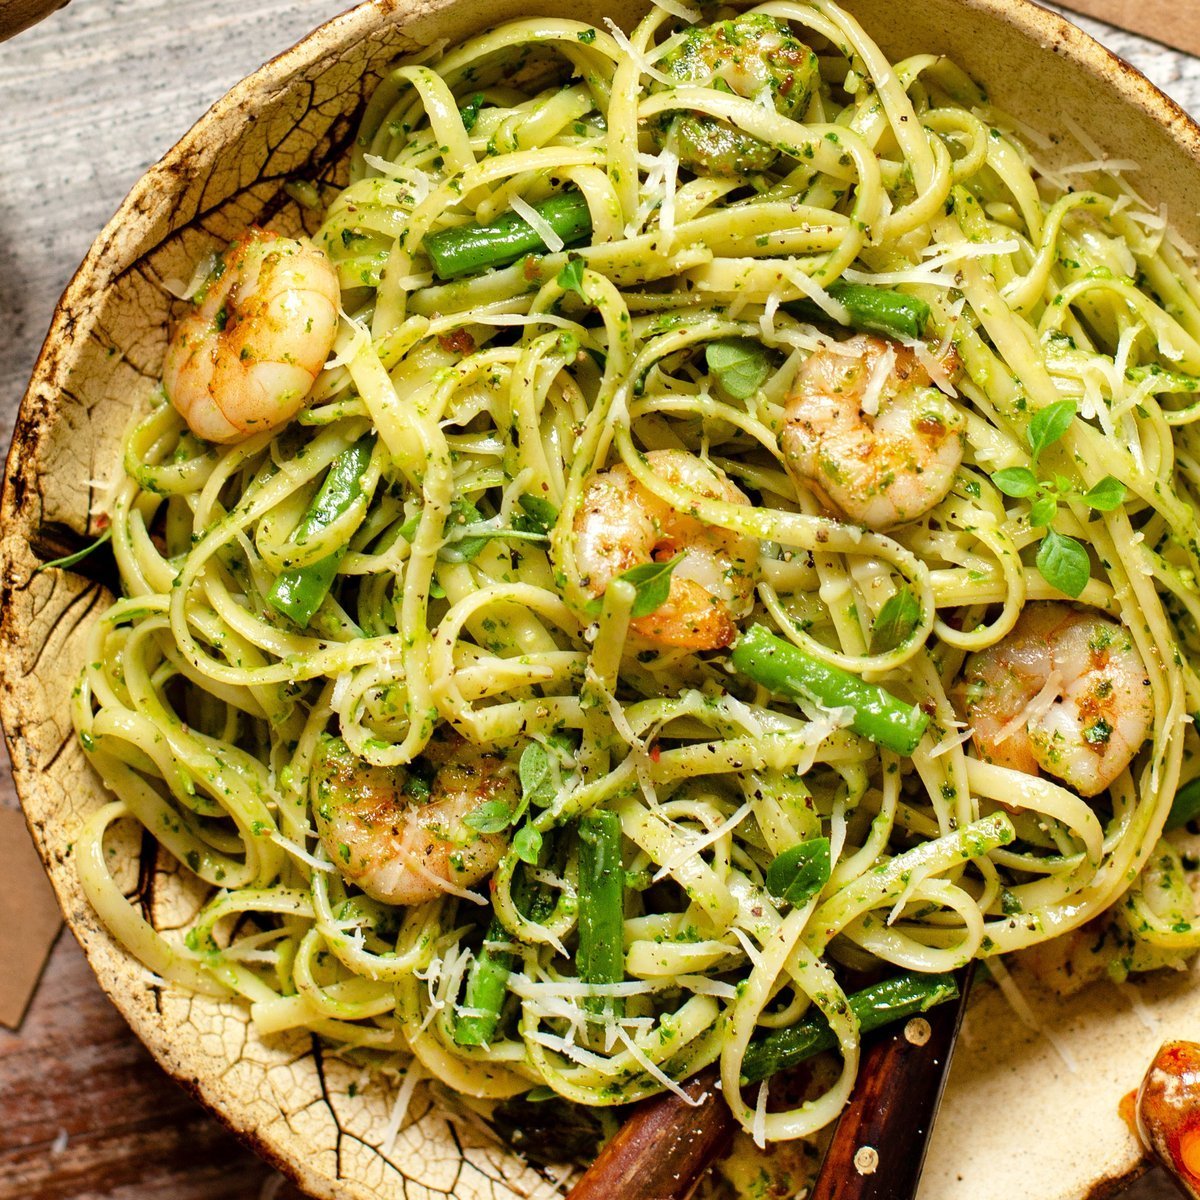 Garlic Shrimp Scampi with Whipped Pea Ricotta Assembly Instructions